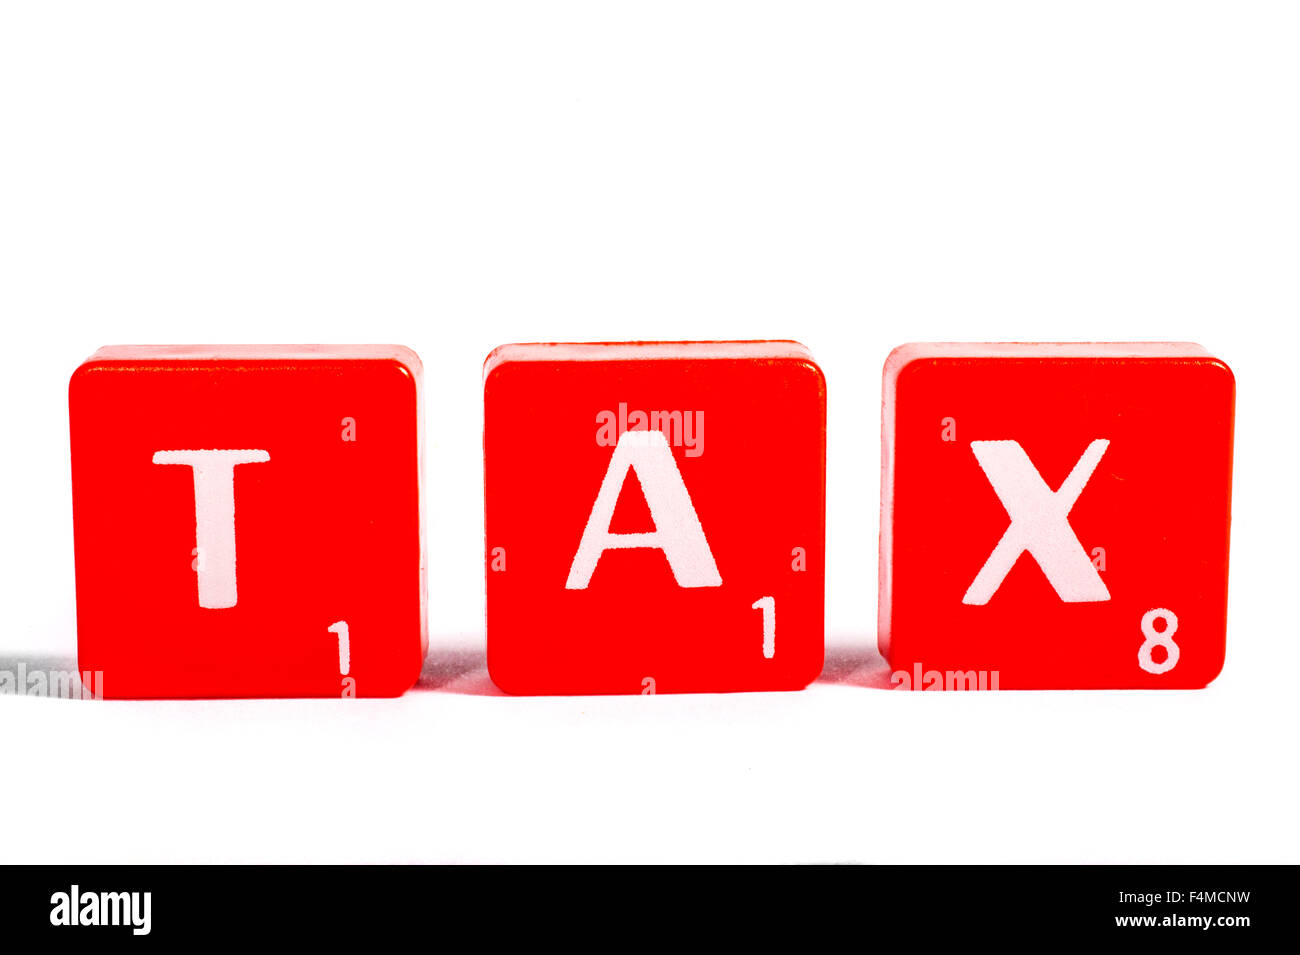 TAX spelt out with red lettered tiles over a white background. Stock Photo